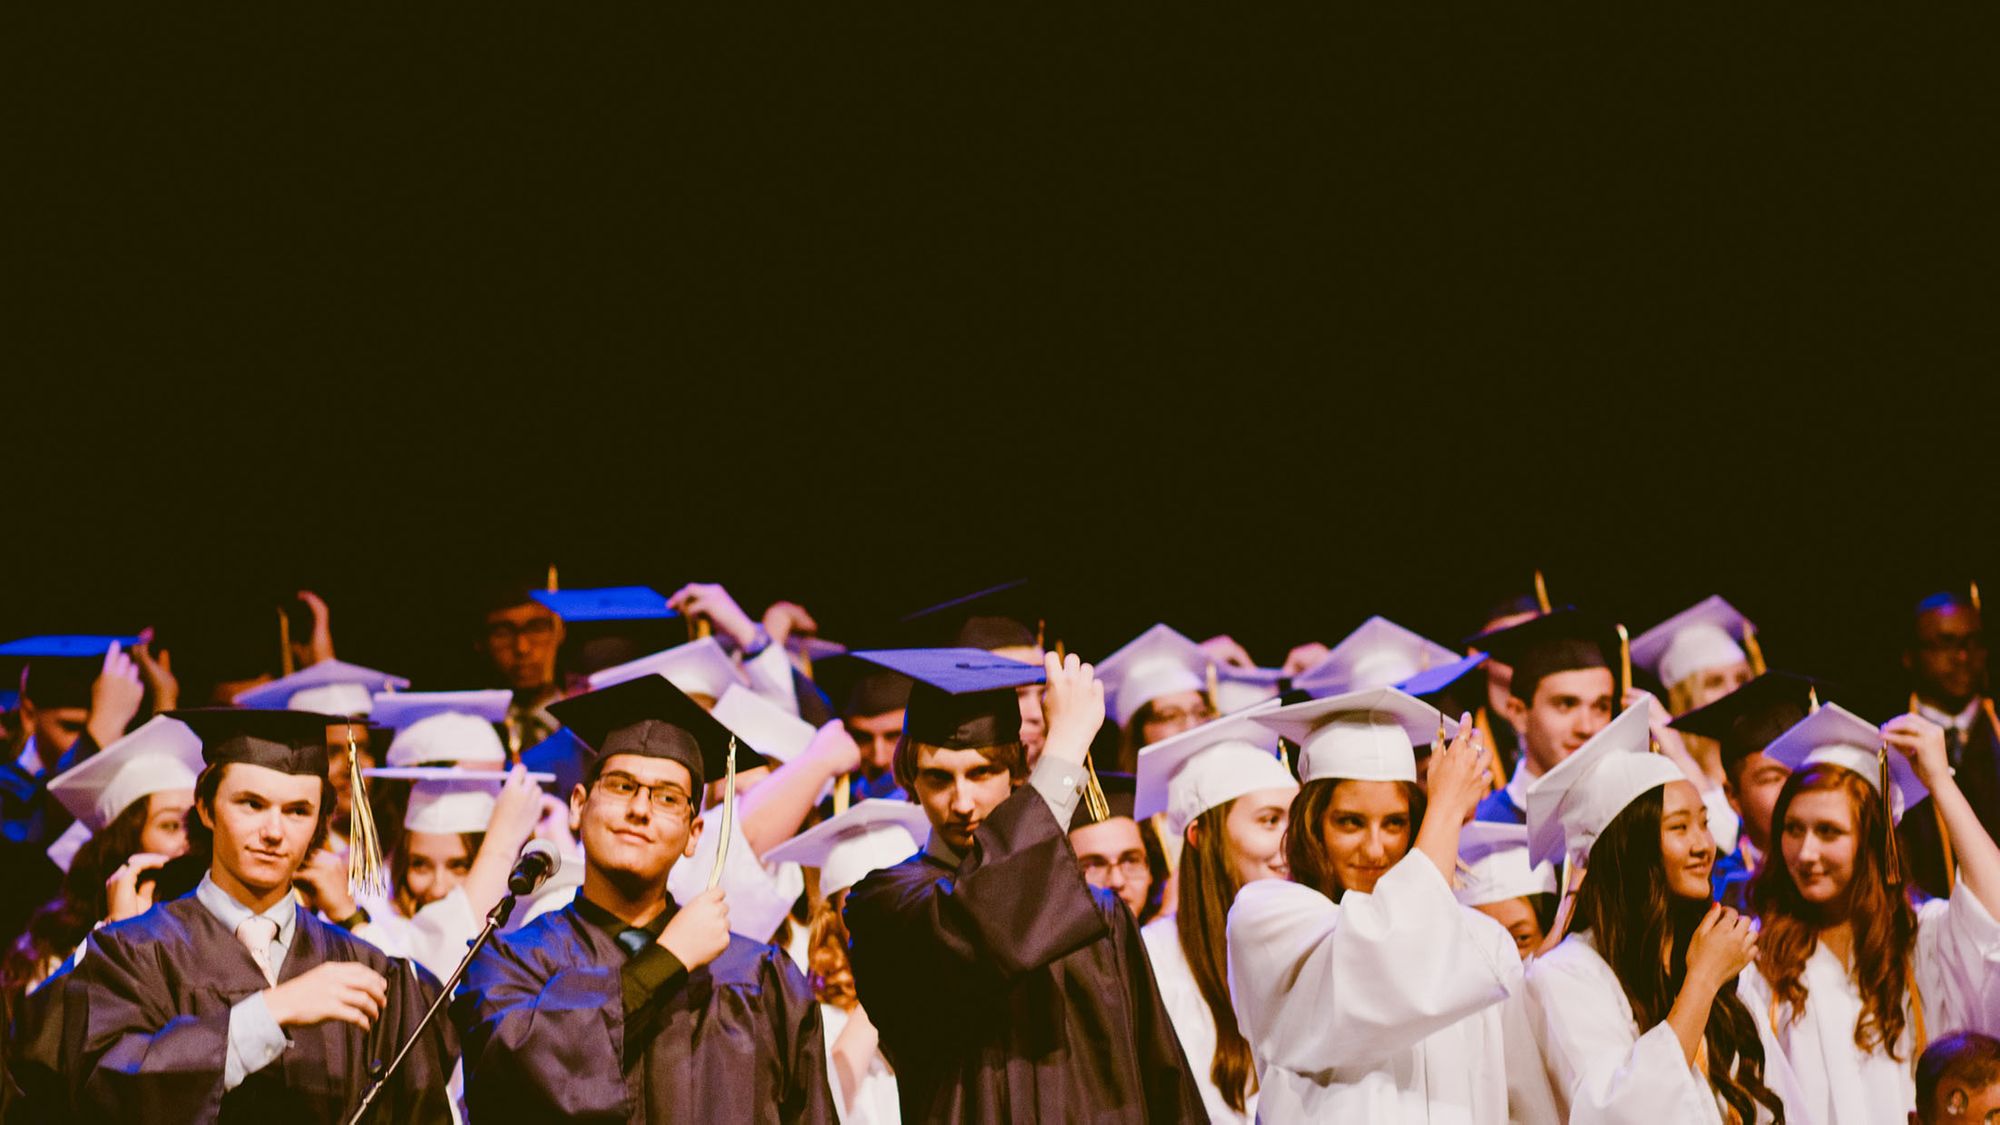 4 Tips For Hiring and Retaining Graduates in 2022